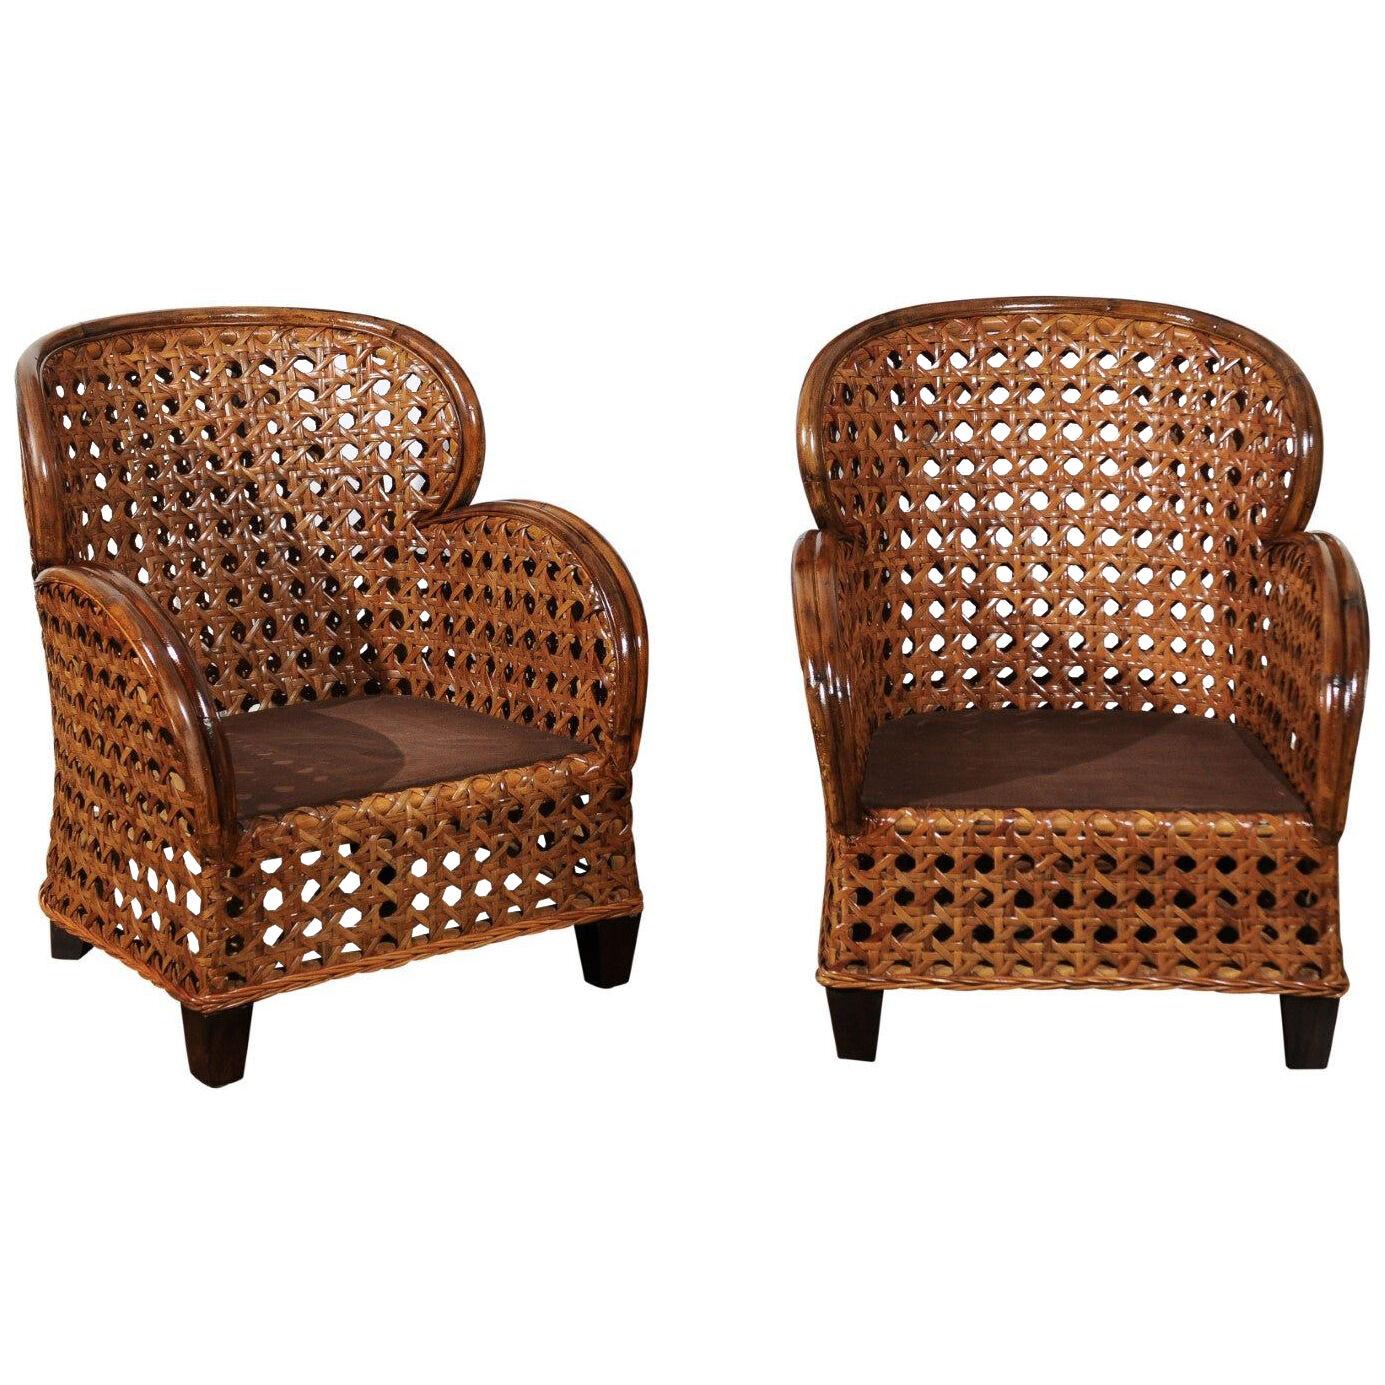 Radiant Pair of Art Deco Revival Club Chairs in Magnificent French Cane